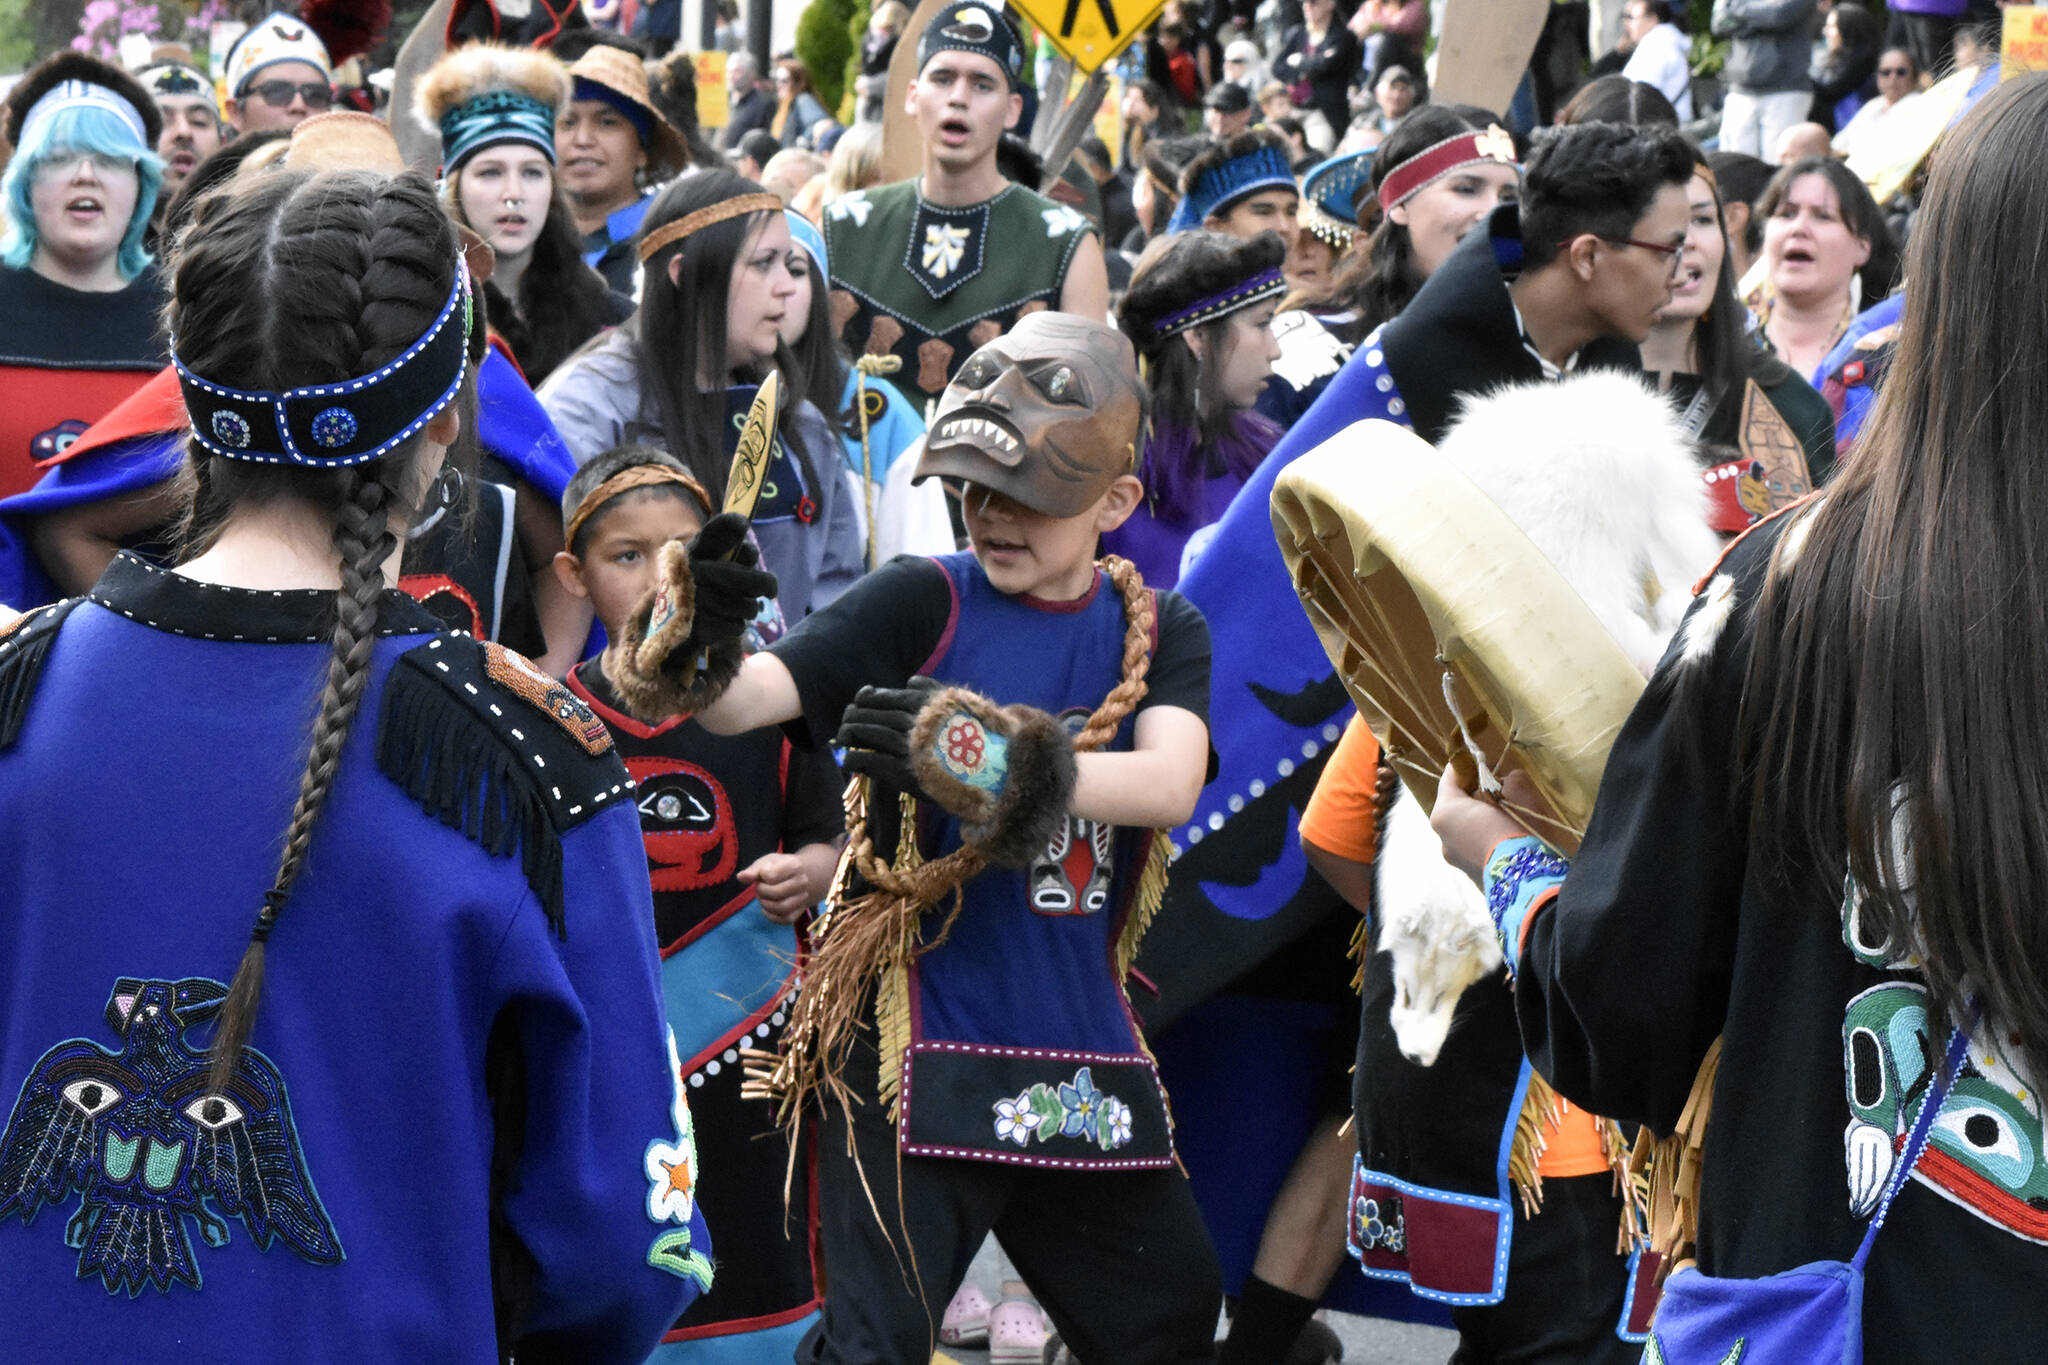 Hundreds of regalia-clad dancers lined Willoughby Avenue behind Centennial Hall on Wednesday, June 8, 2022, in preparation for Celebration 2022’s grand procession through the hall. (Peter Segall / Juneau Empire)